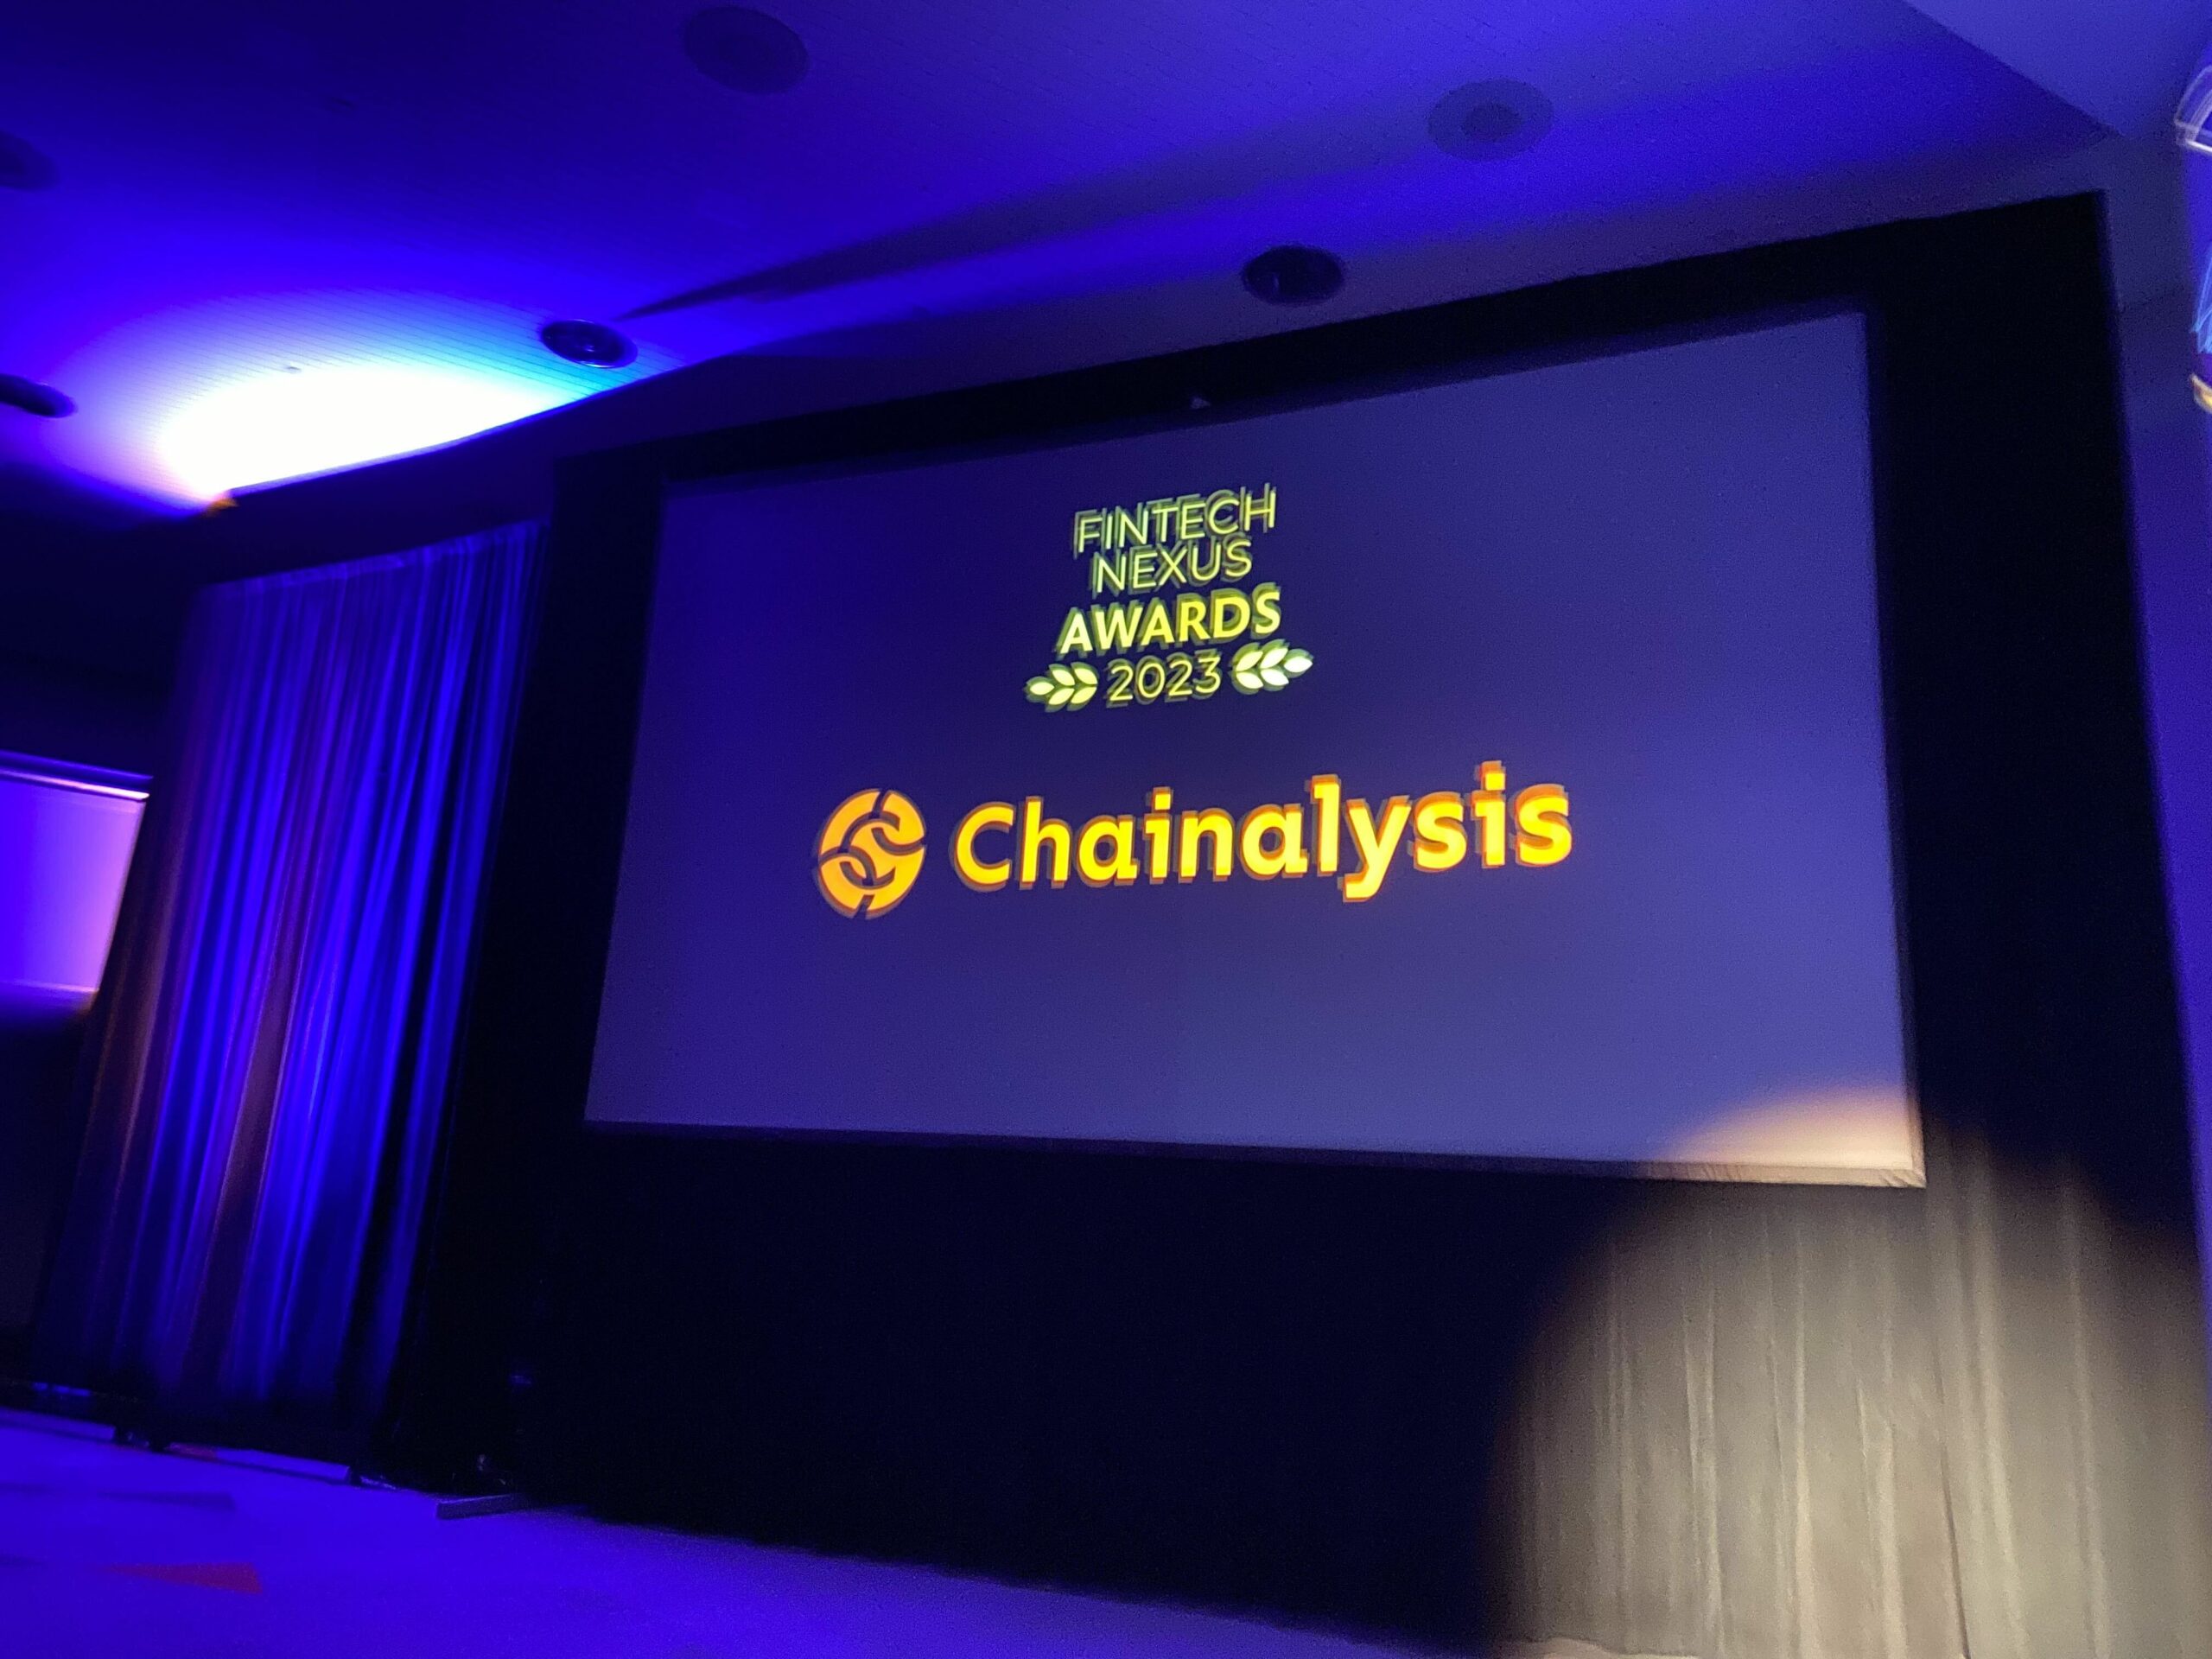 Fintech Nexus USA 2023 Best of Blockchain in Financial Services Chainalysis - The Basis Point